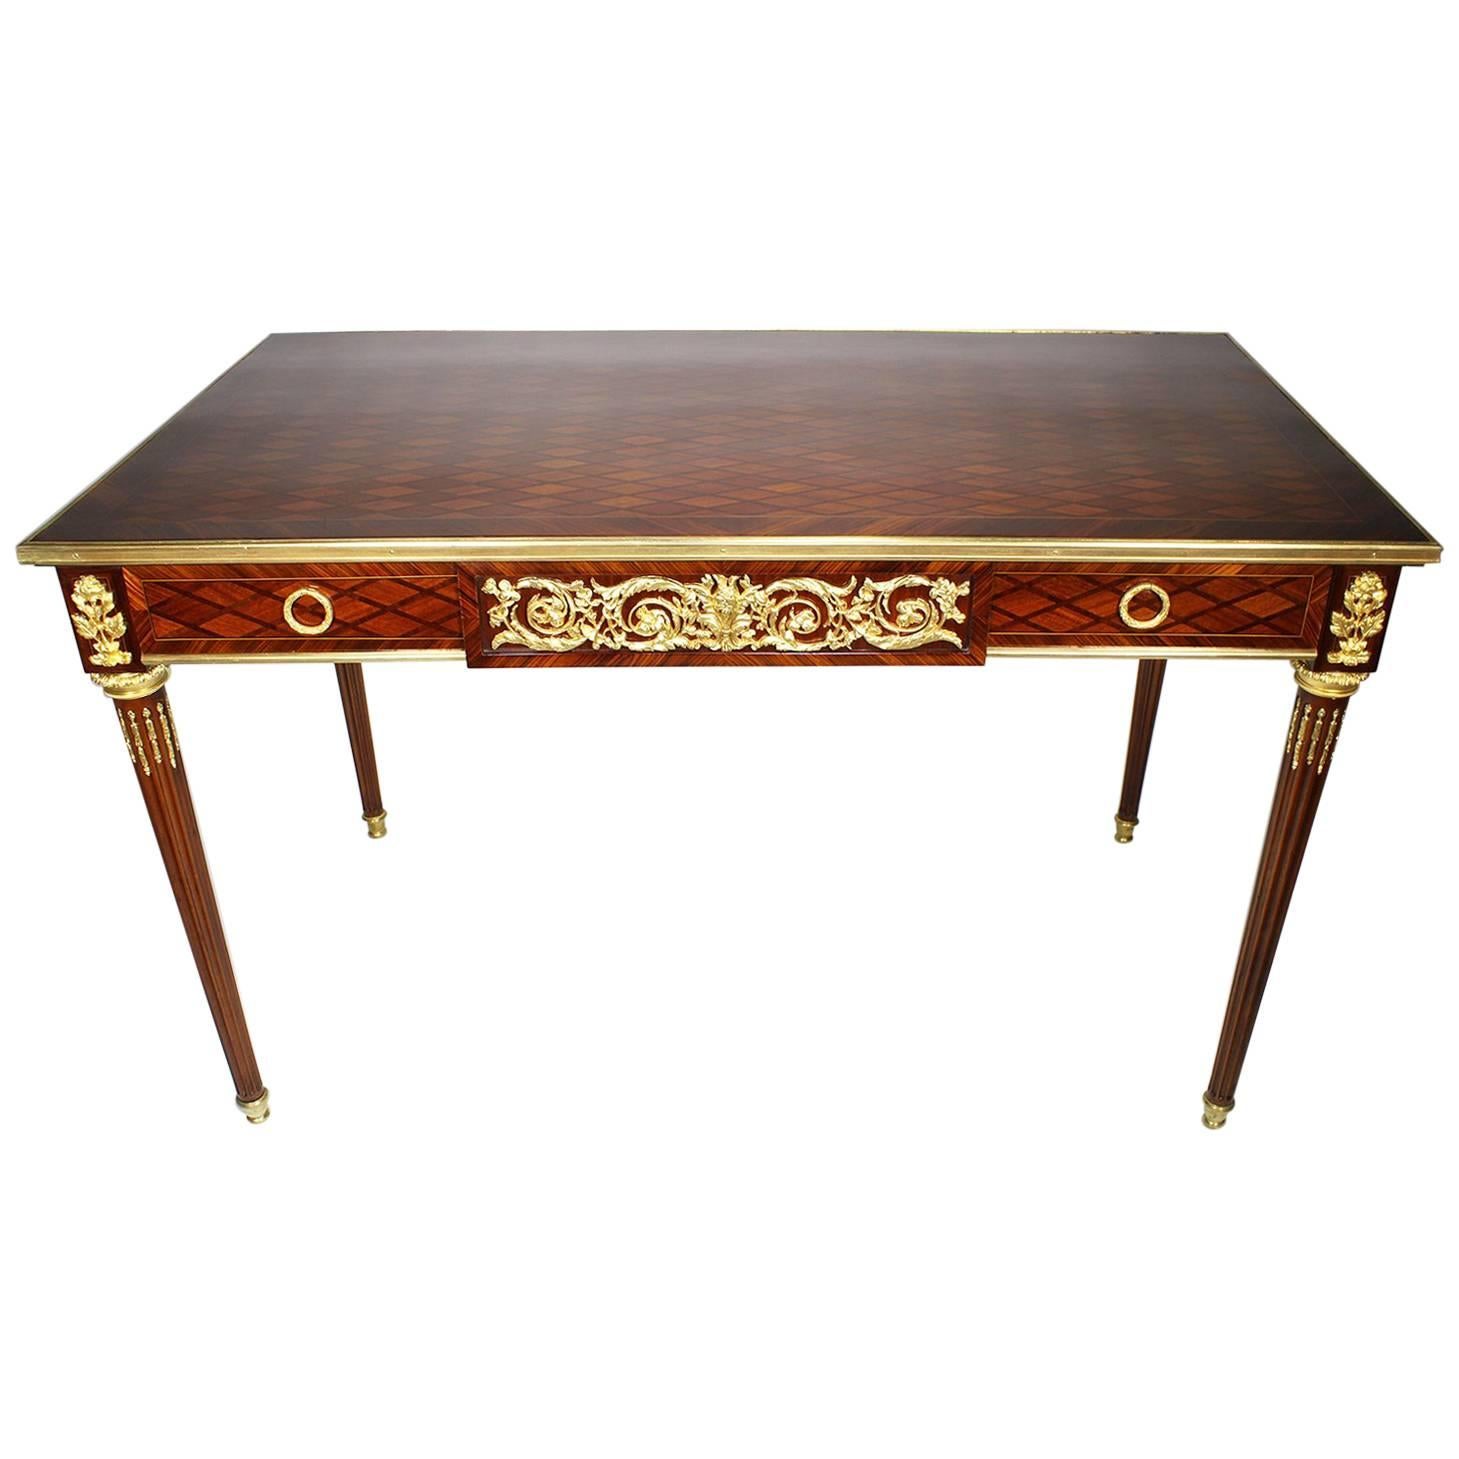 French Louis XVI Style Kingwood Parquetry & Ormolu Mounted Ladies Writing Table For Sale